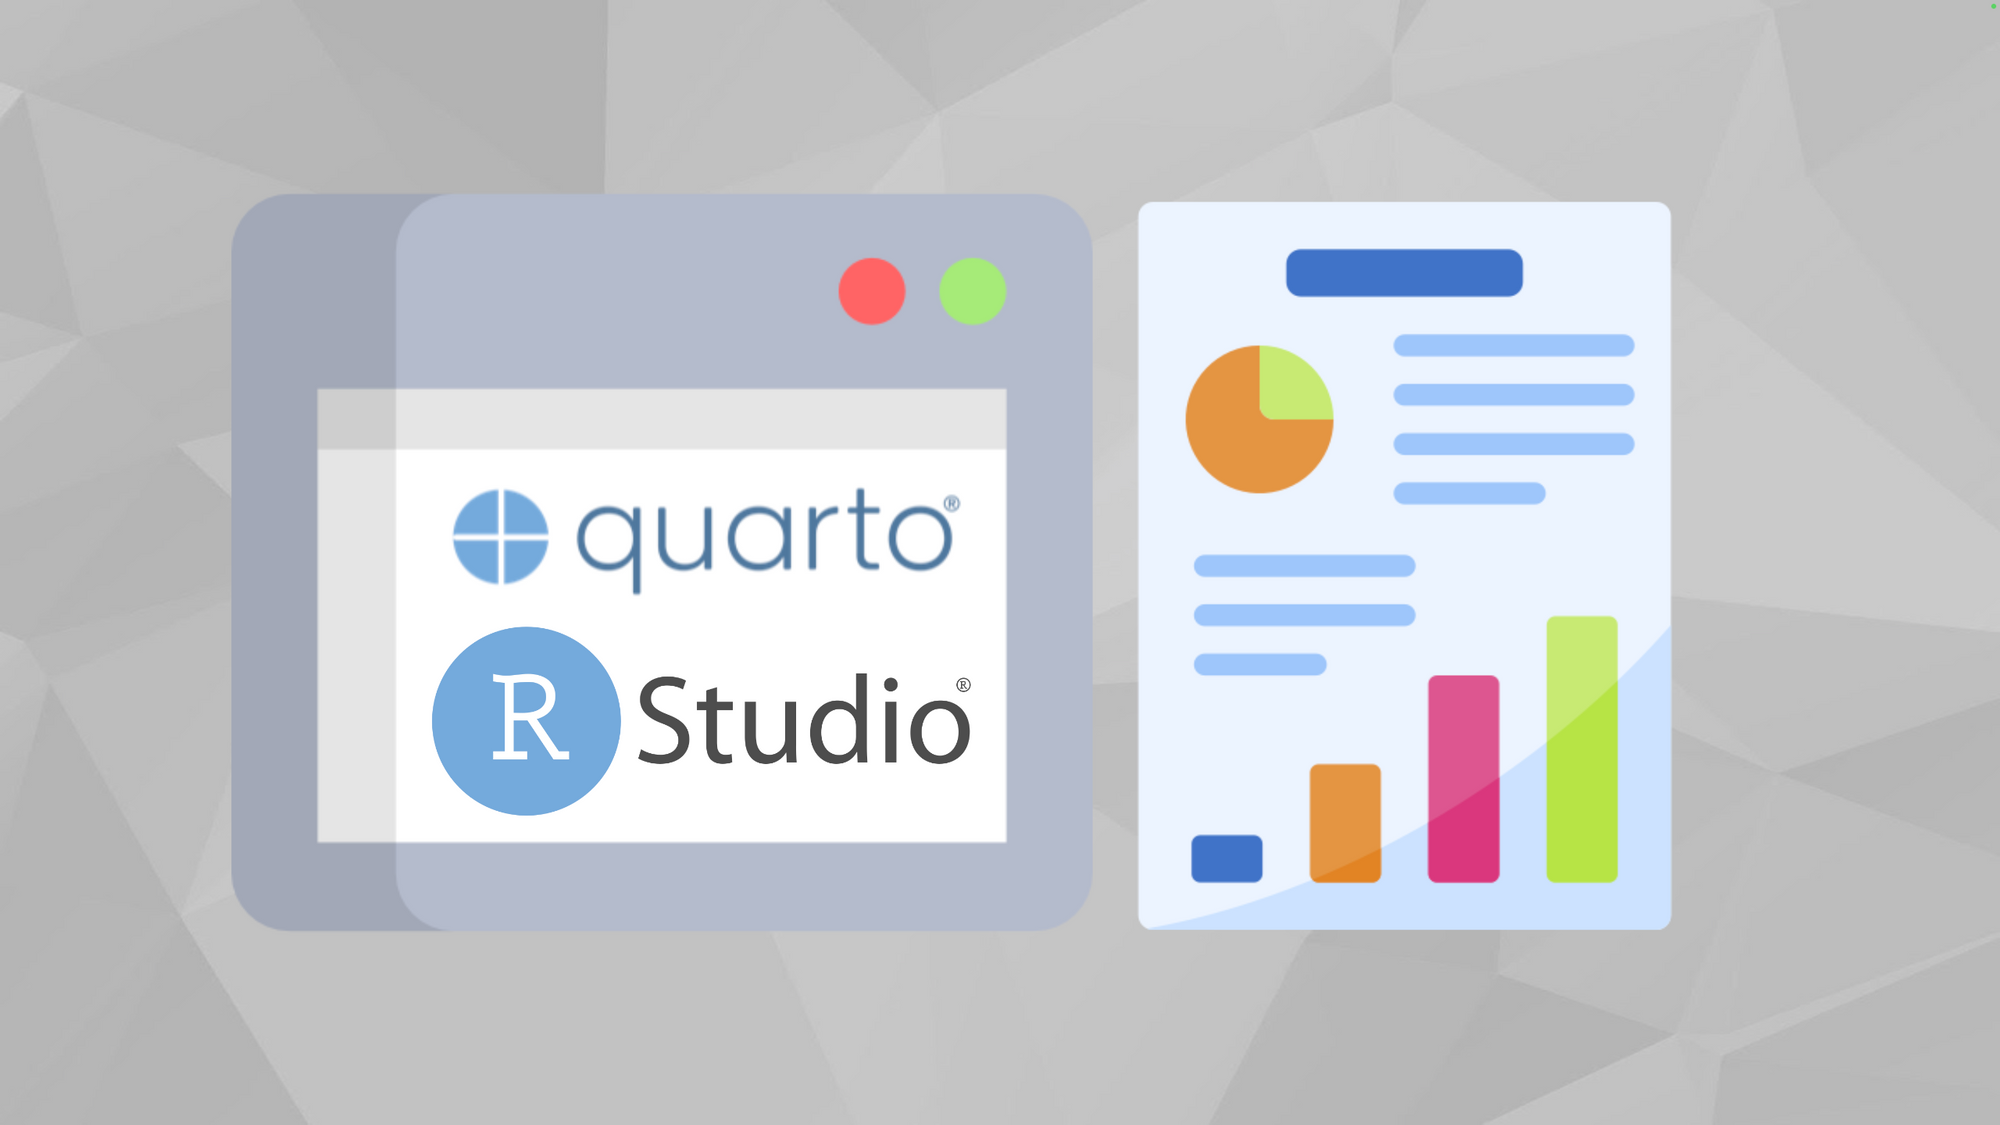 How to install and use Quarto with RStudio on a RONIN Machine